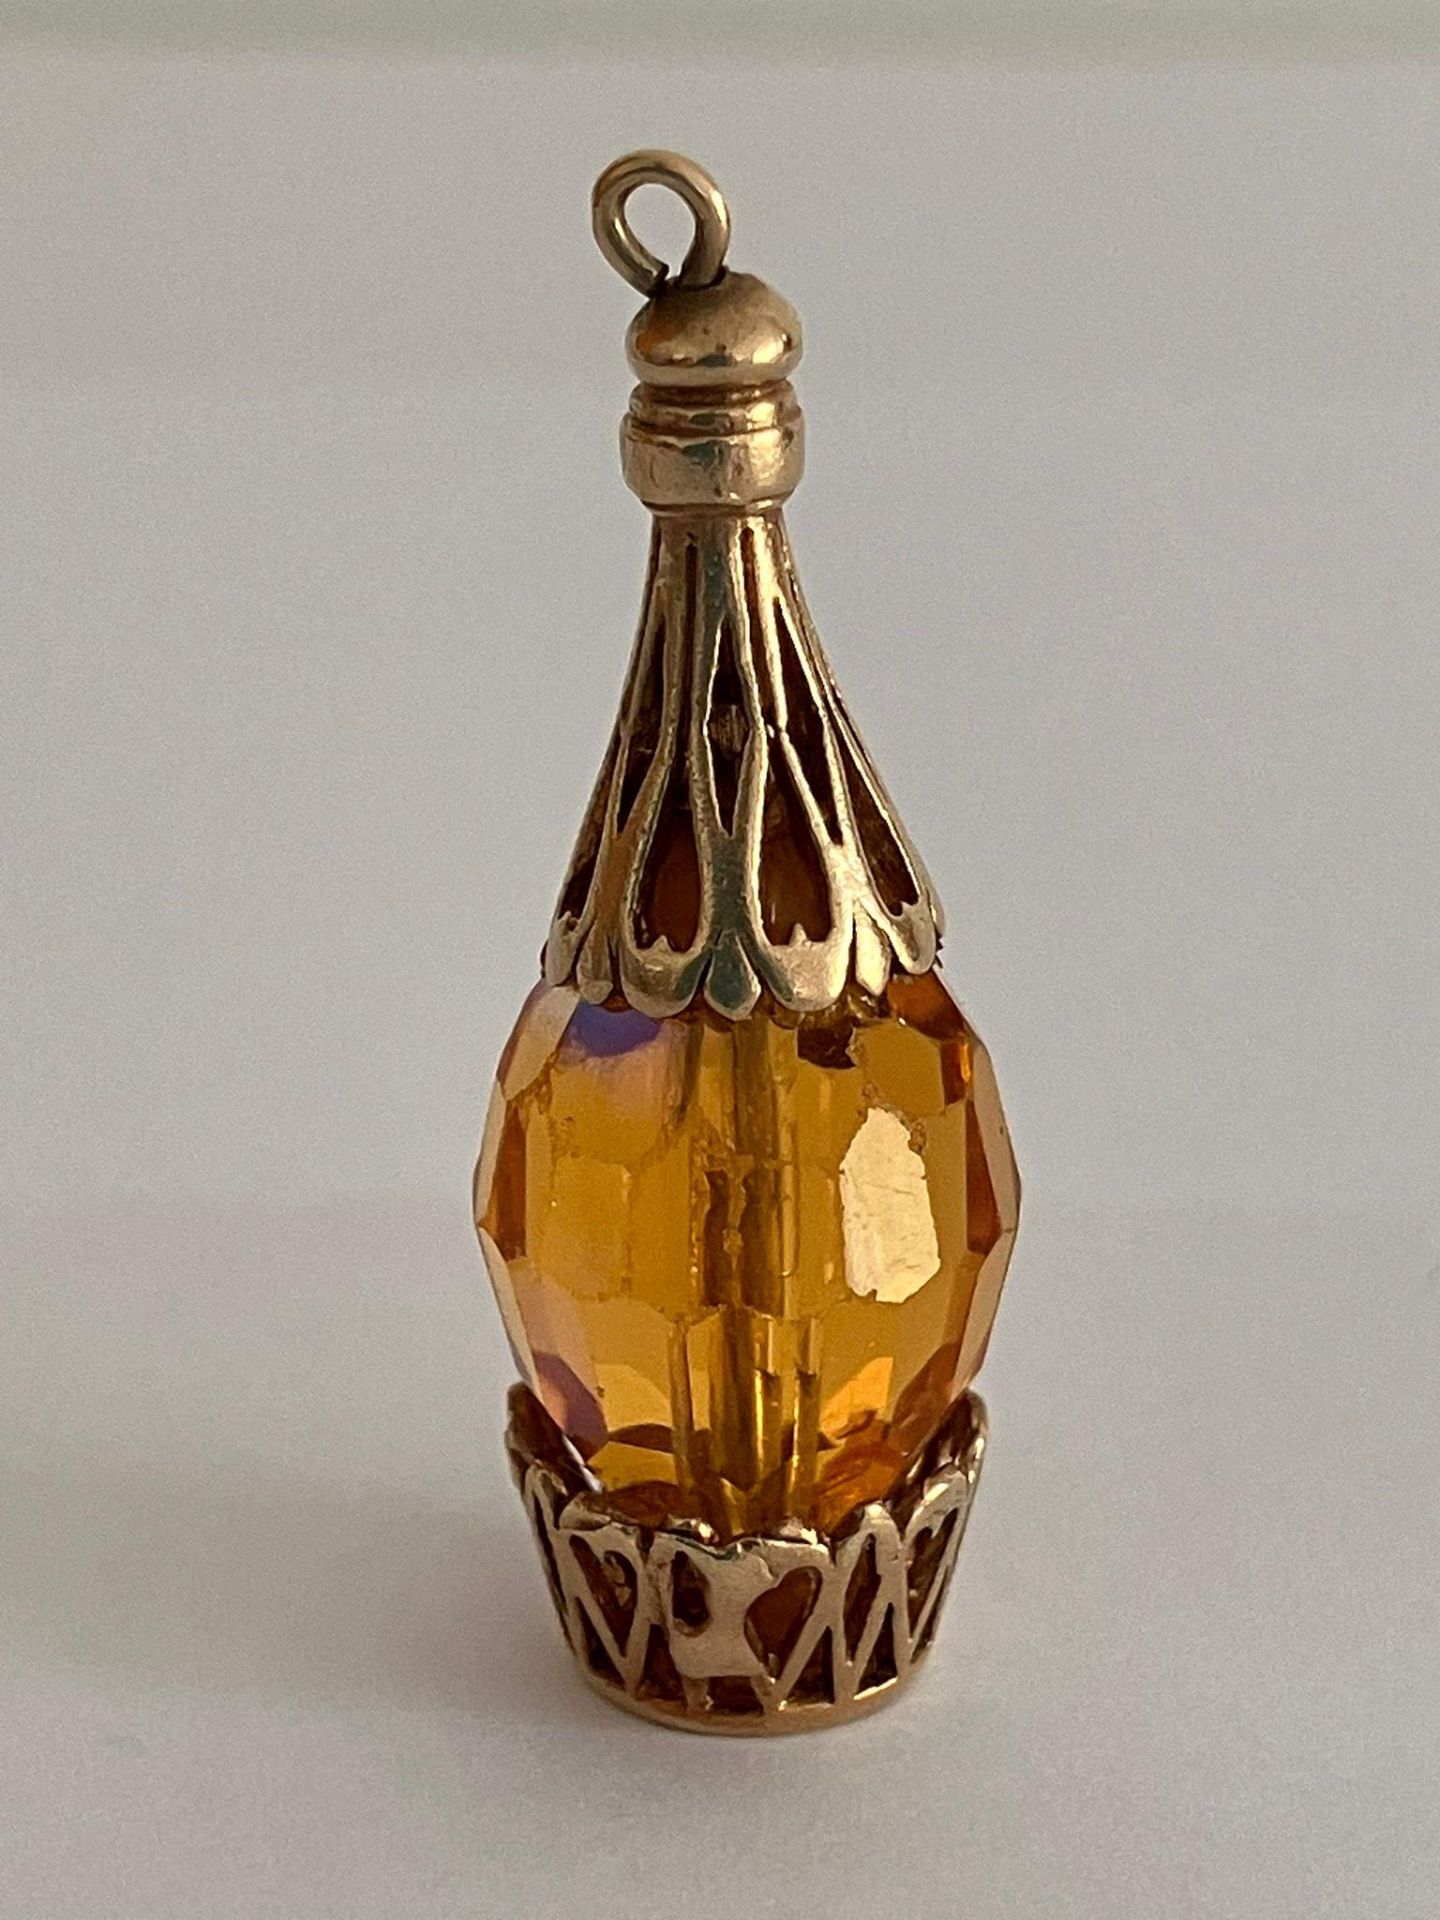 9 carat GOLD CHARM in the form of an Italian wine bottle. 5.3 grams.